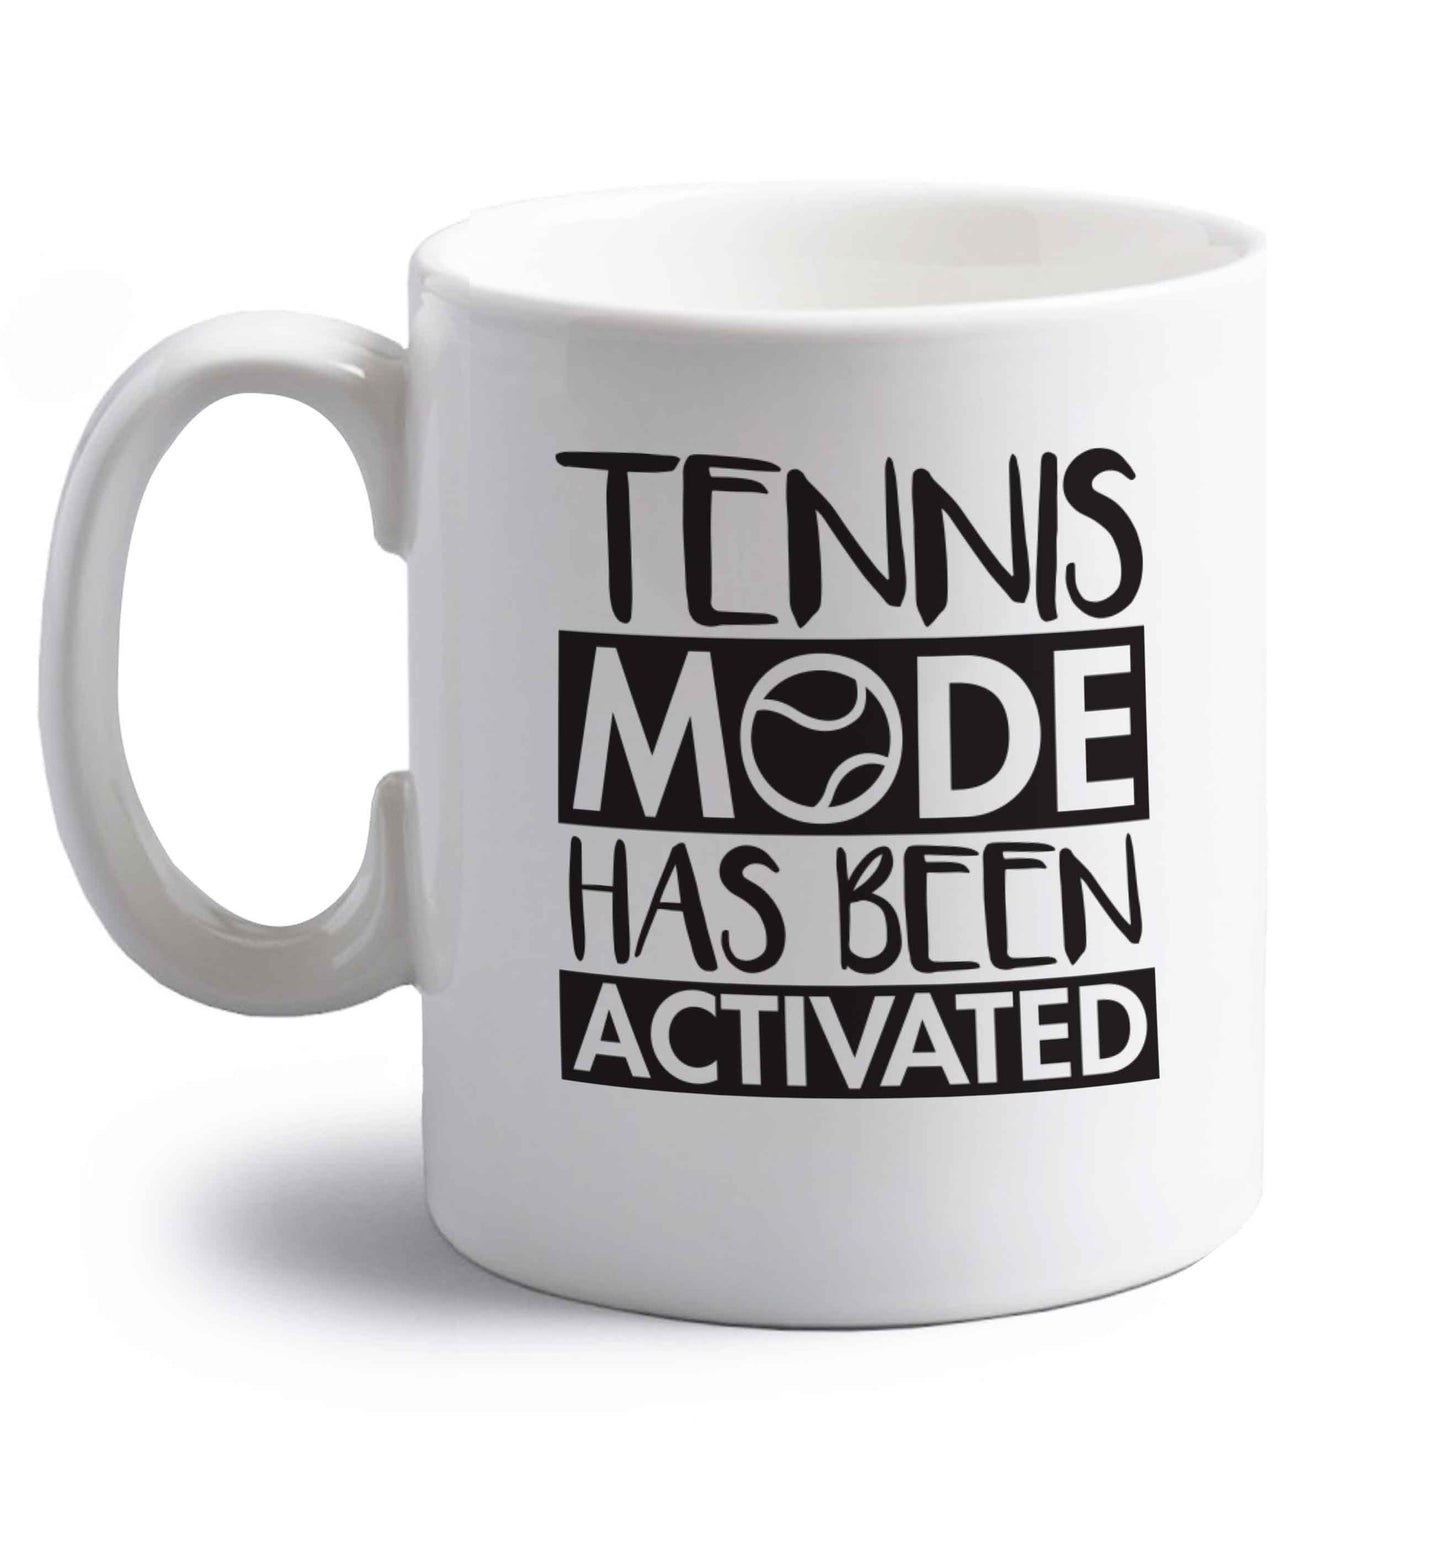 Tennis mode has been activated right handed white ceramic mug 